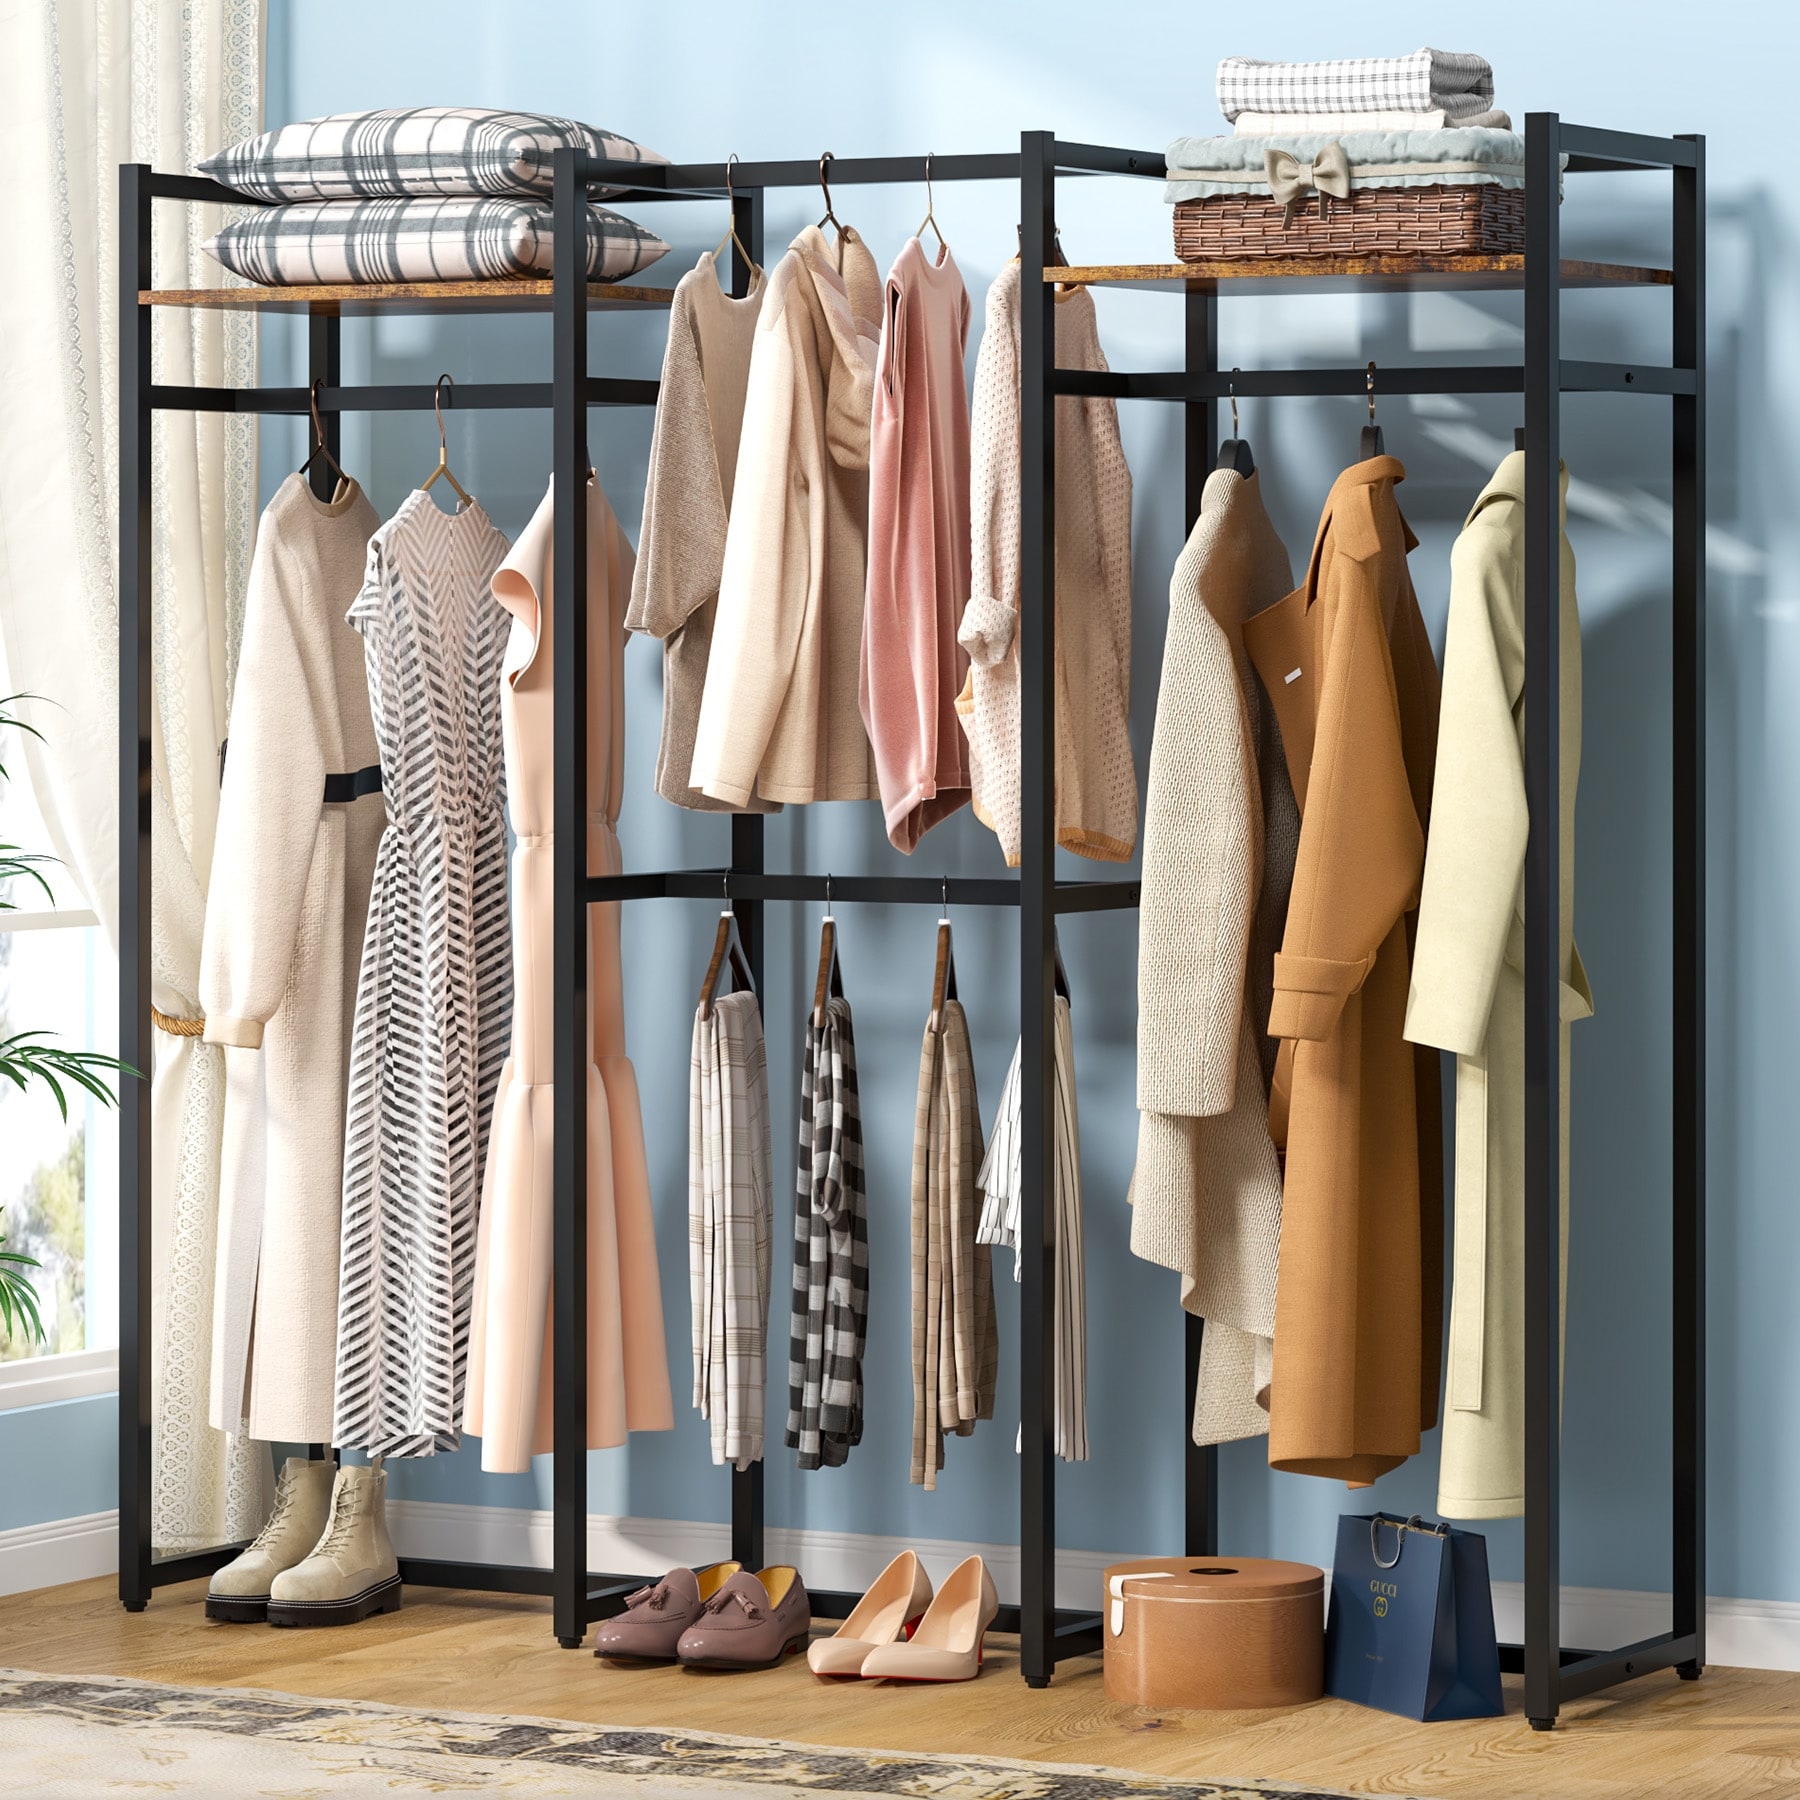 https://ak1.ostkcdn.com/images/products/is/images/direct/35e6e907b2ff96bed1af903be2c56fc3d4c86252/Garment-Rack-Heavy-Duty-Clothes-Rack-Free-Standing-Closet-Organizer-with-Shelves%2C-Large-Size-Storage-Rack-with-4-hanging-Rods.jpg